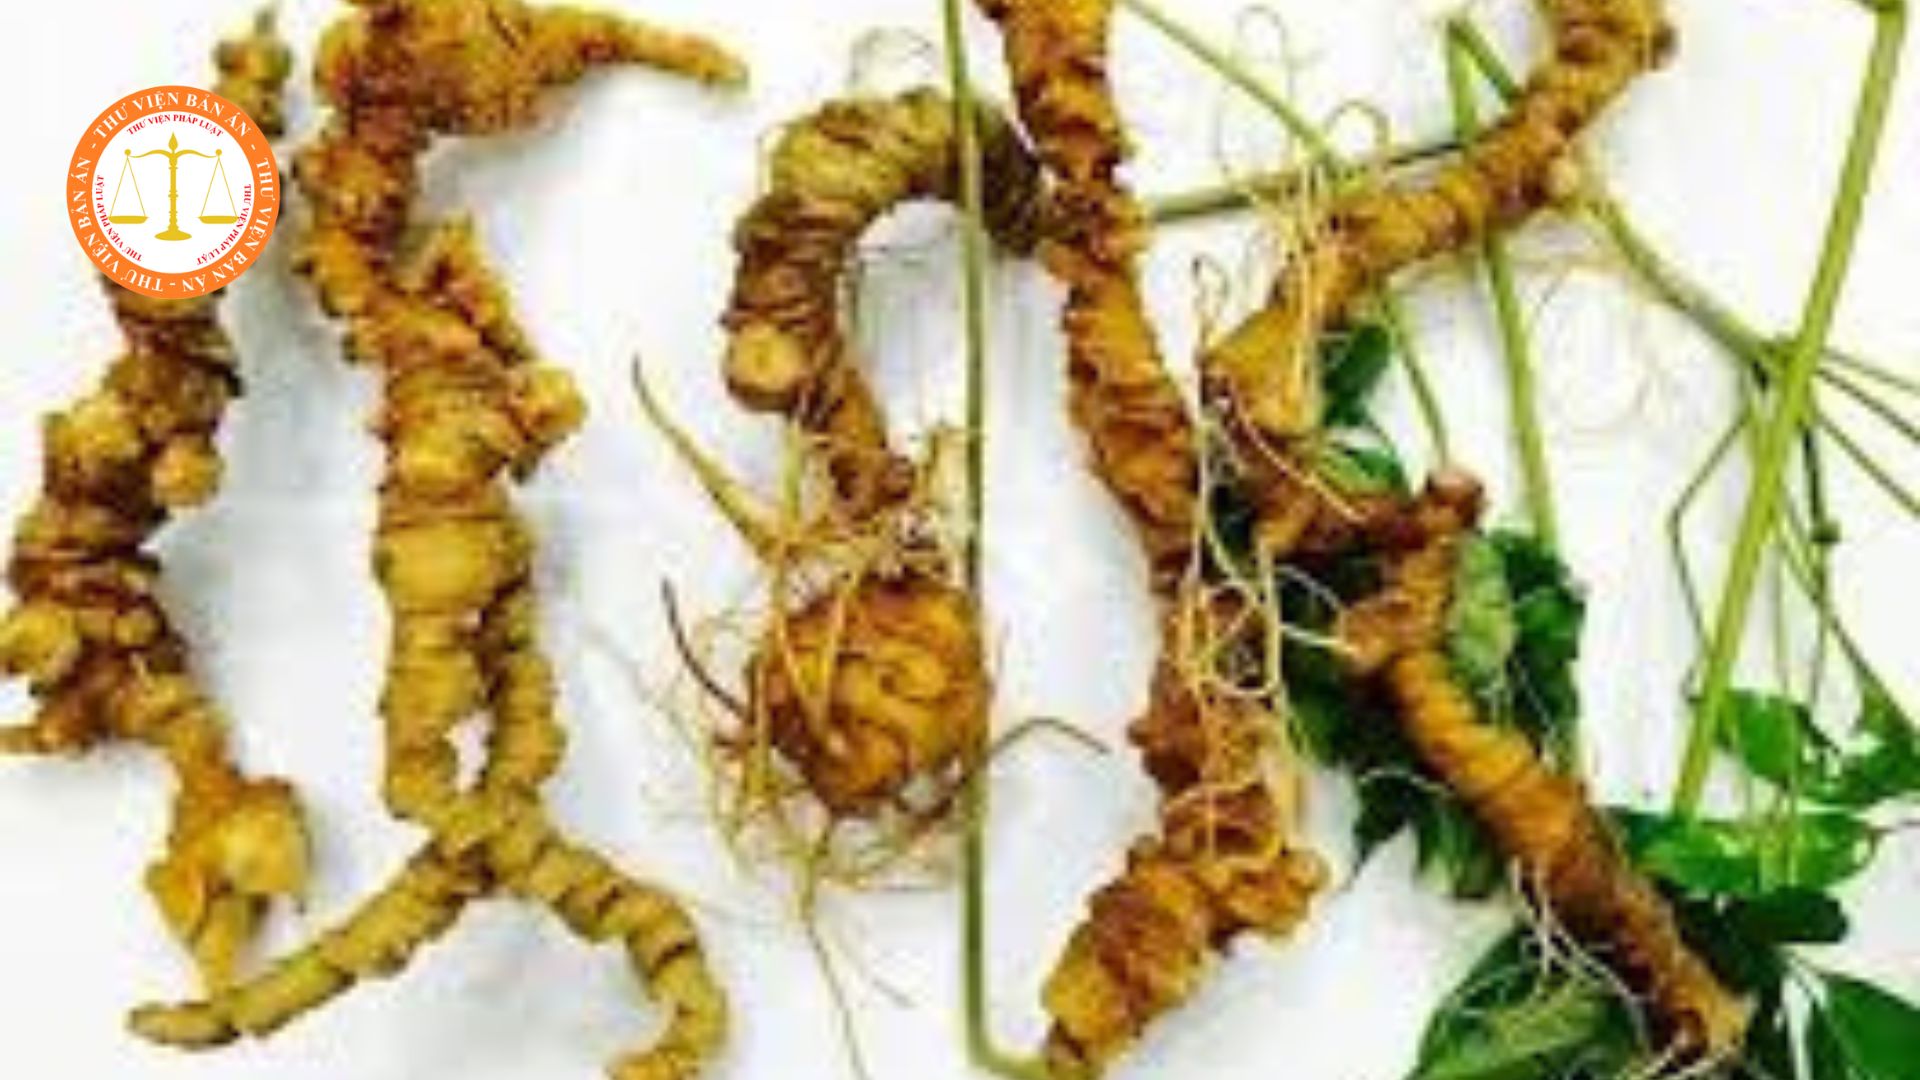 Penalties for acts of stealing Ngoc Linh ginseng in Vietnam